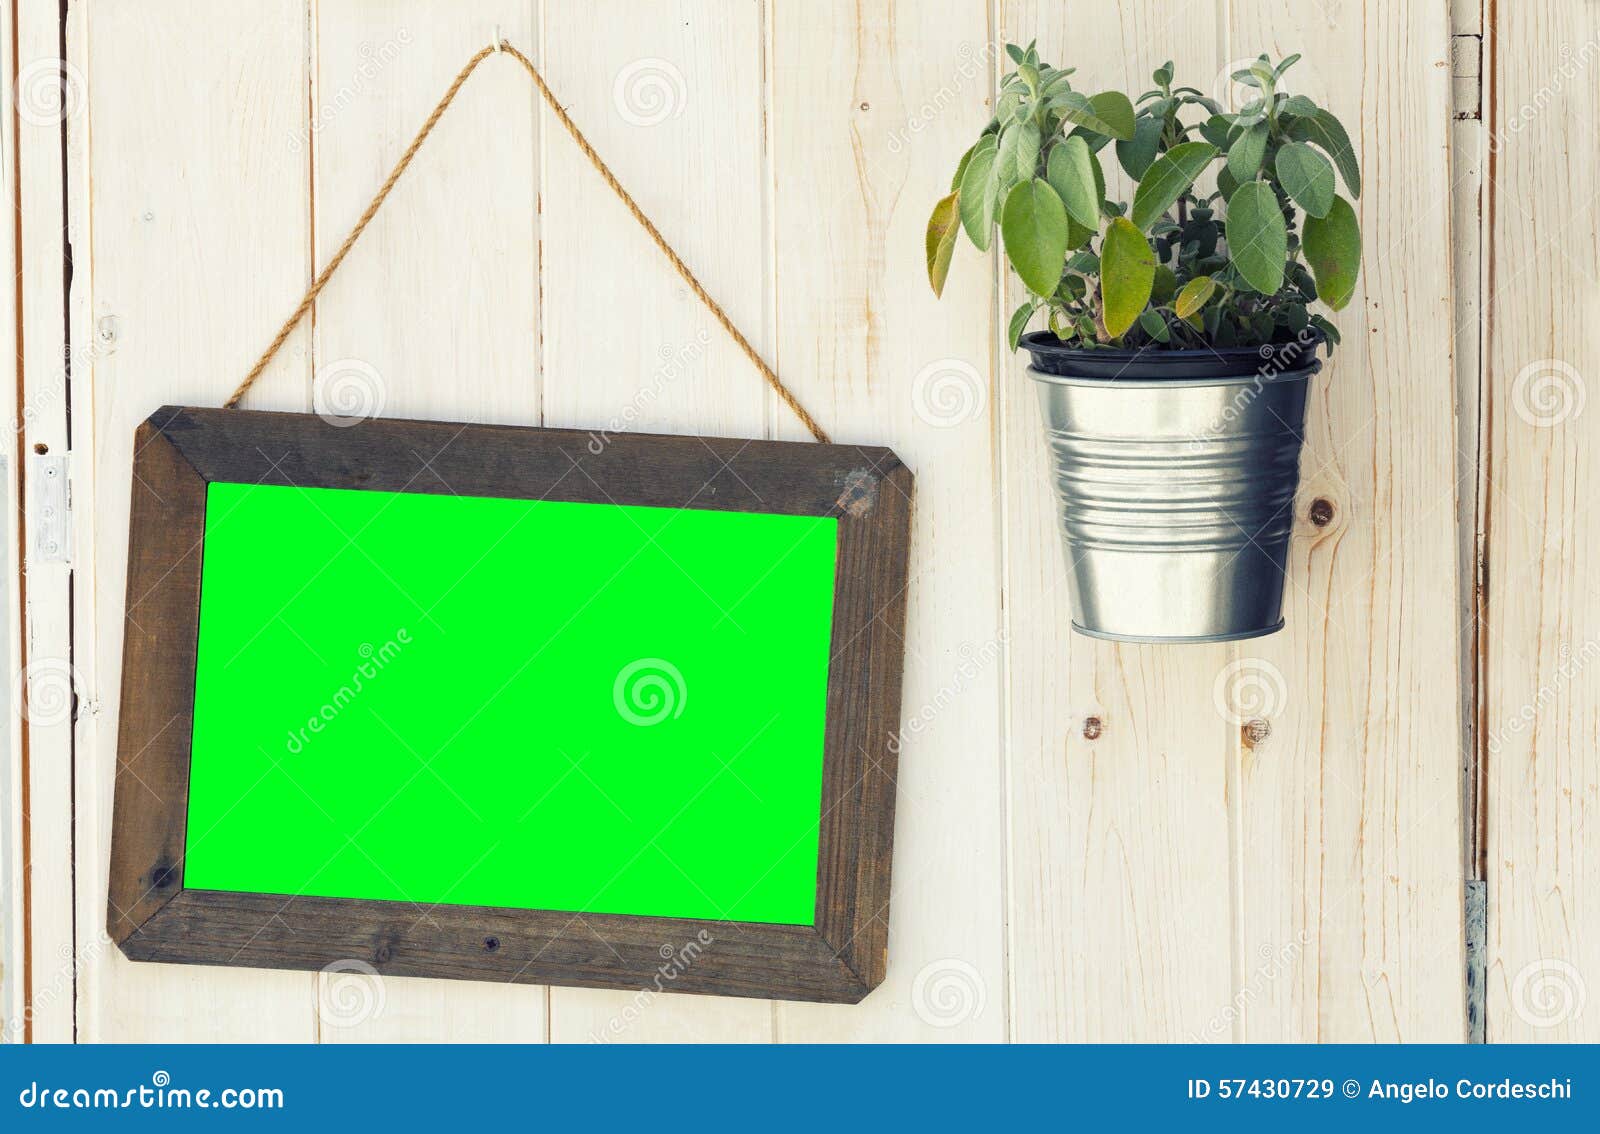 picture frame green screen pot plant wooden surface png available space to replace color easily your image 57430729